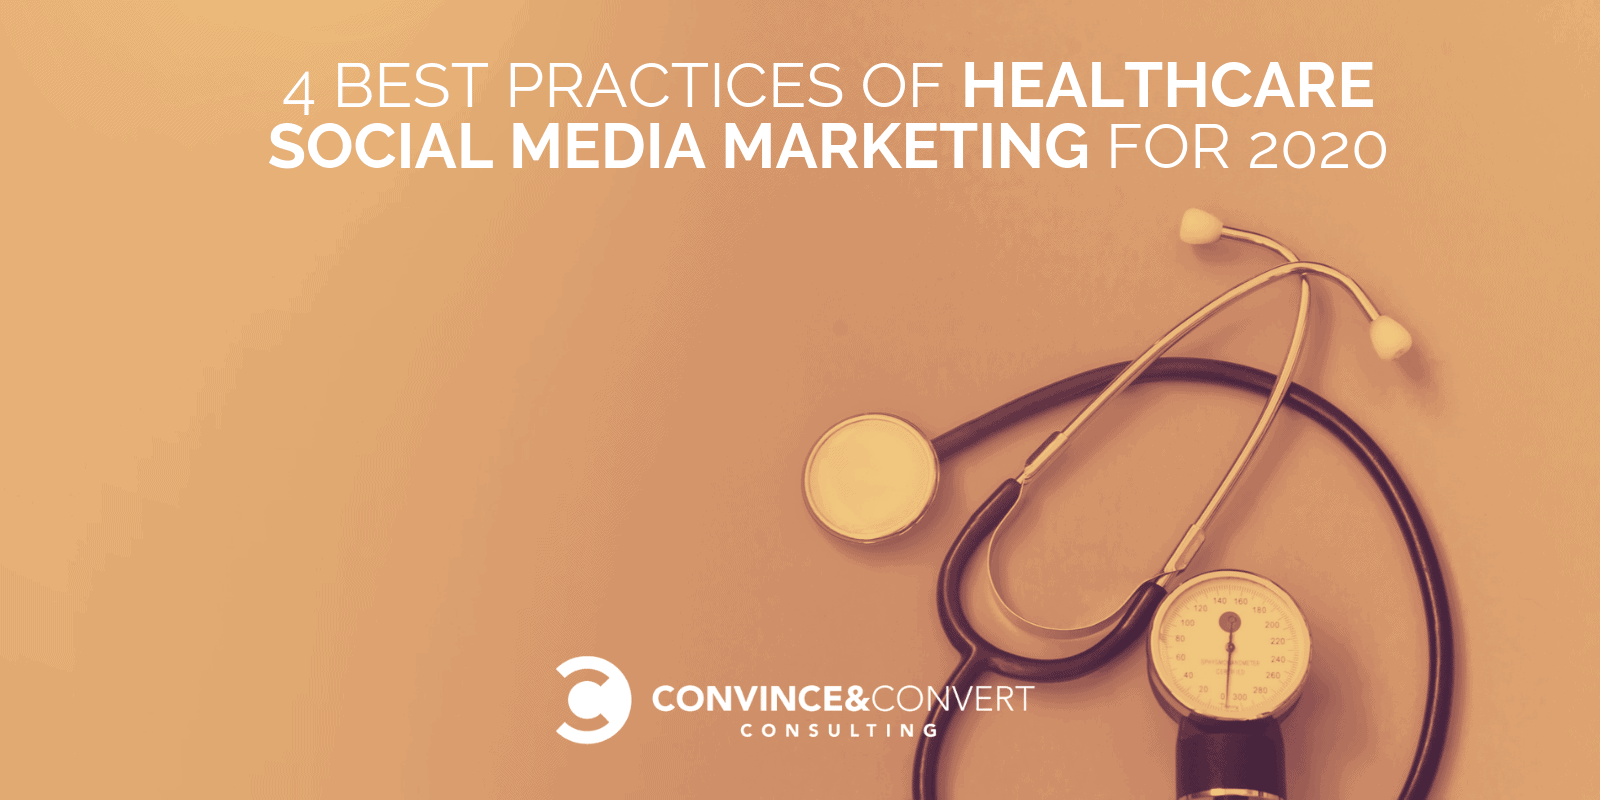 The 4 Best Practices of Healthcare Social Media Marketing for 2020 |